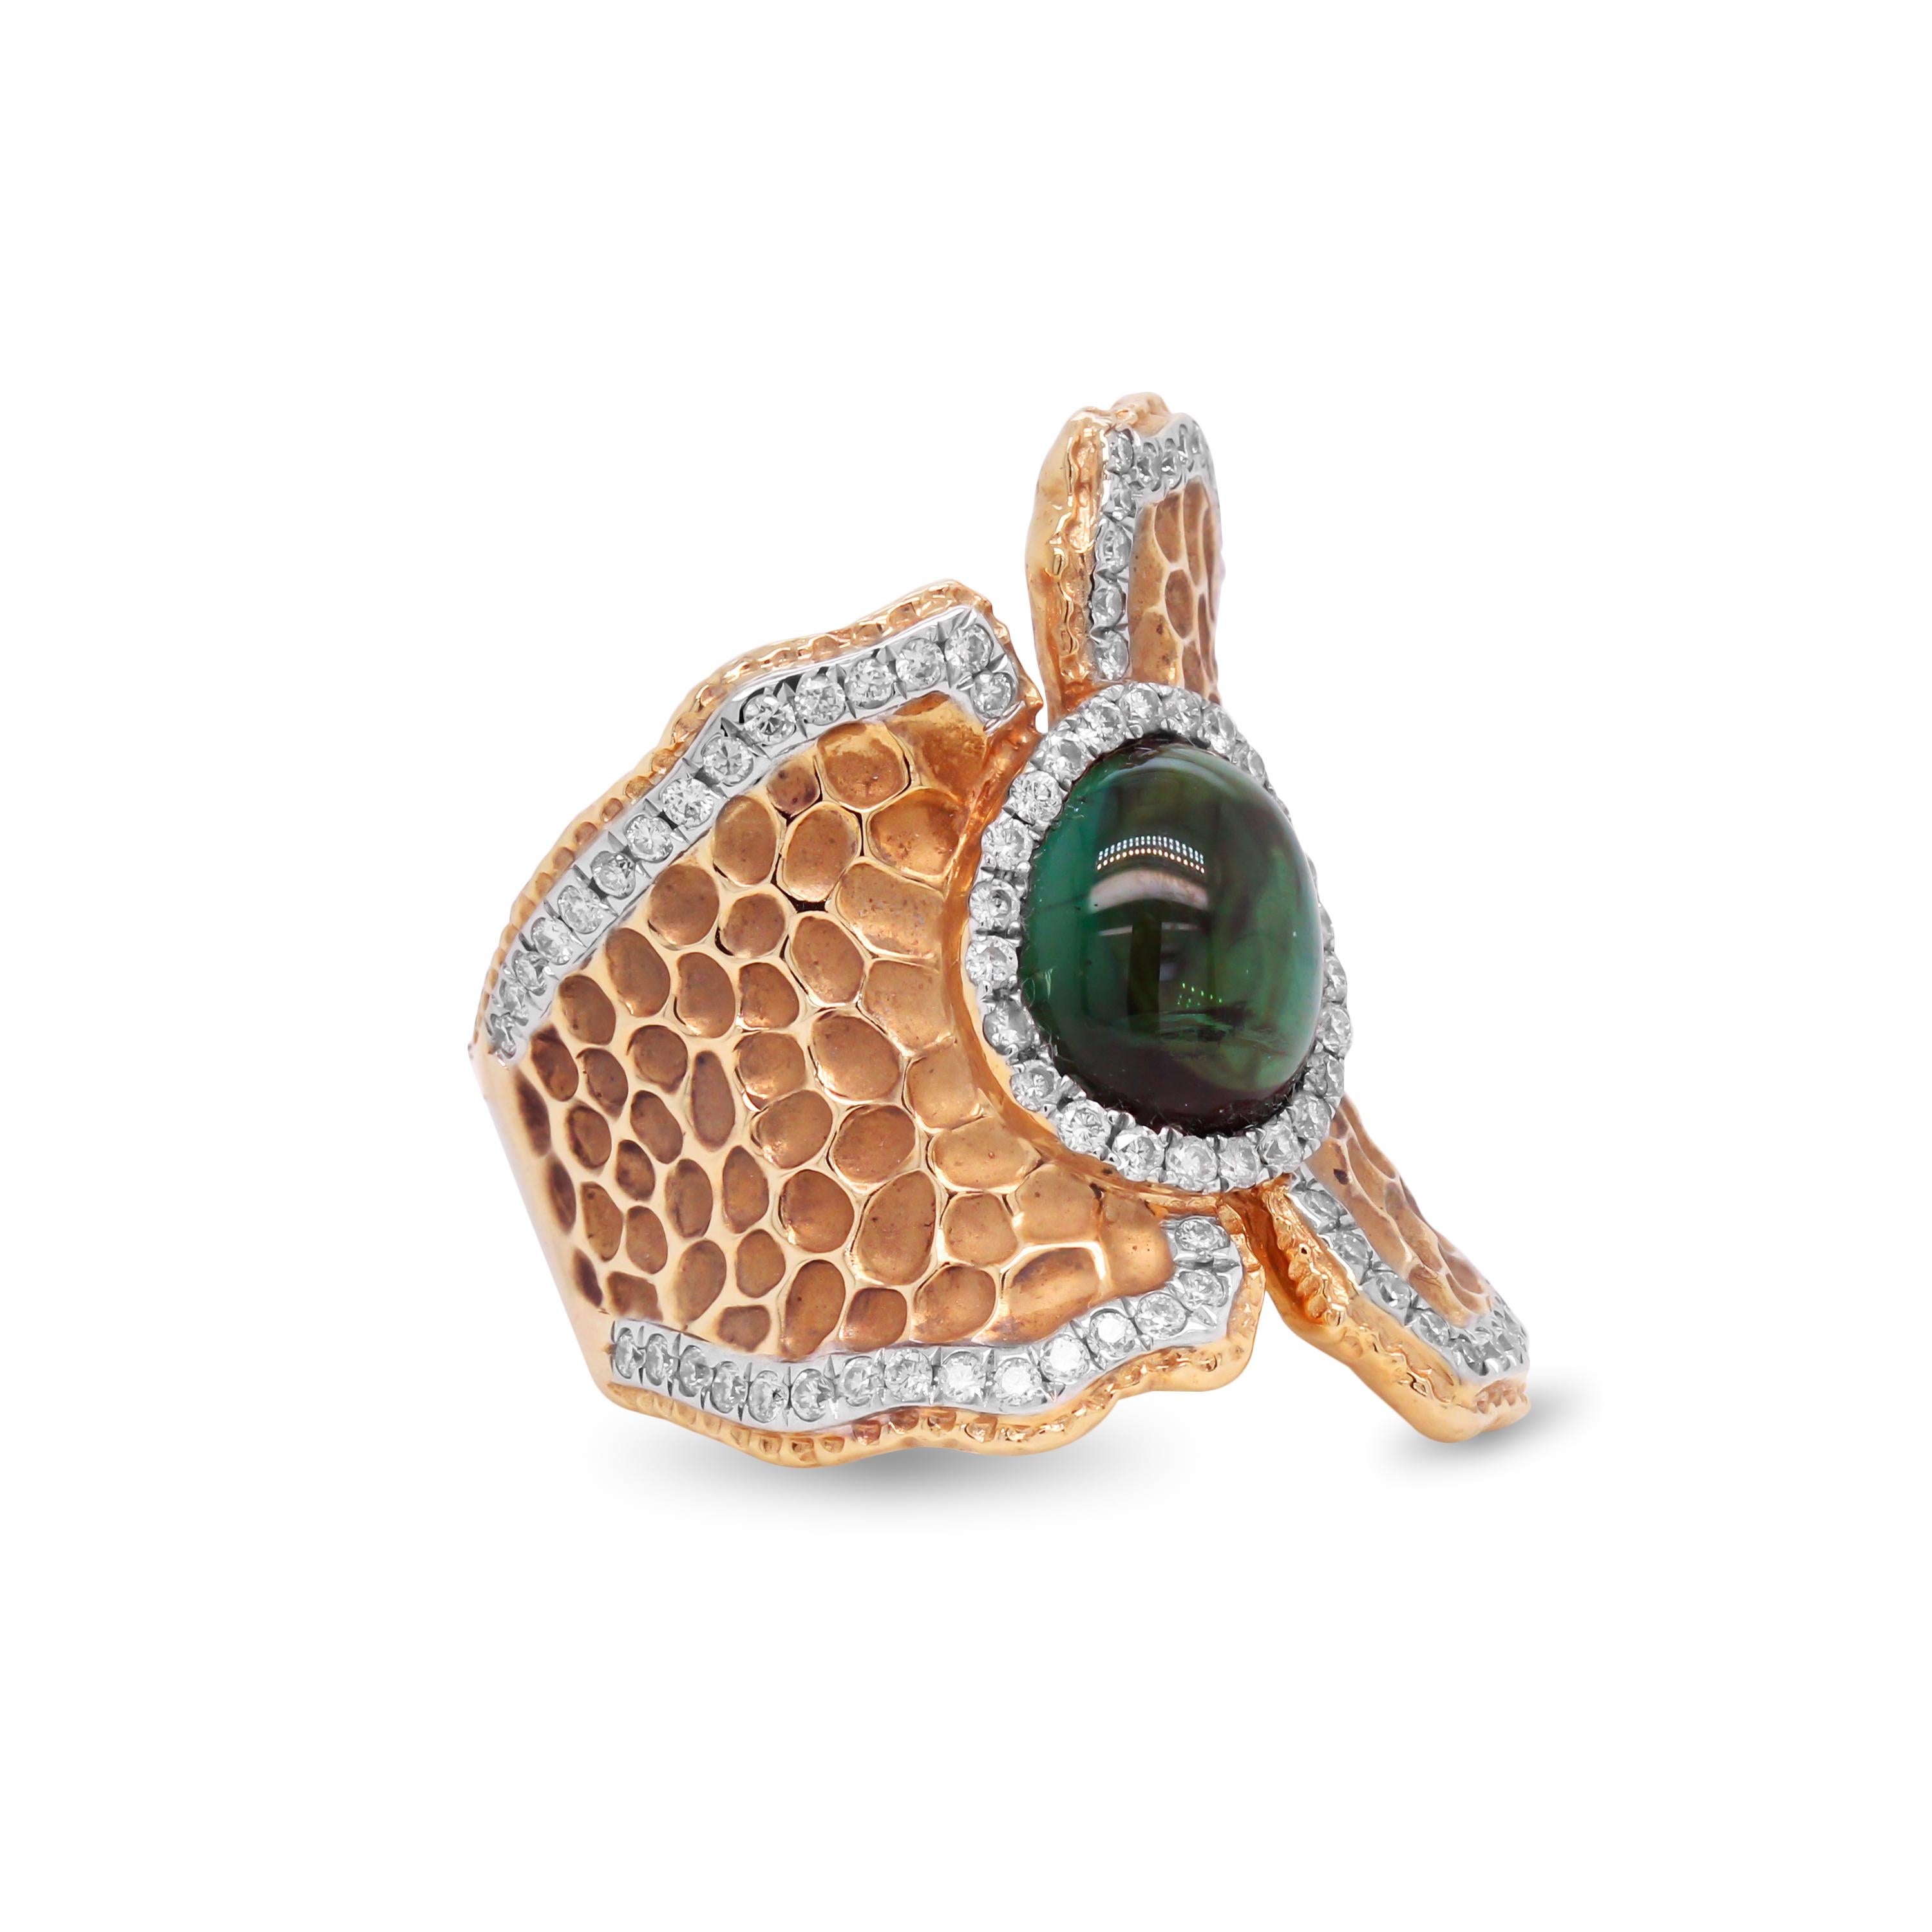 18K Yellow Gold and Diamond Wide Cocktail Ring with Cabochon Green Tourmaline Center

This unique ring features an incredible design pattern all throughout the ring with diamonds set on the edges and surrounding the Tourmaline center

0.94 carat G